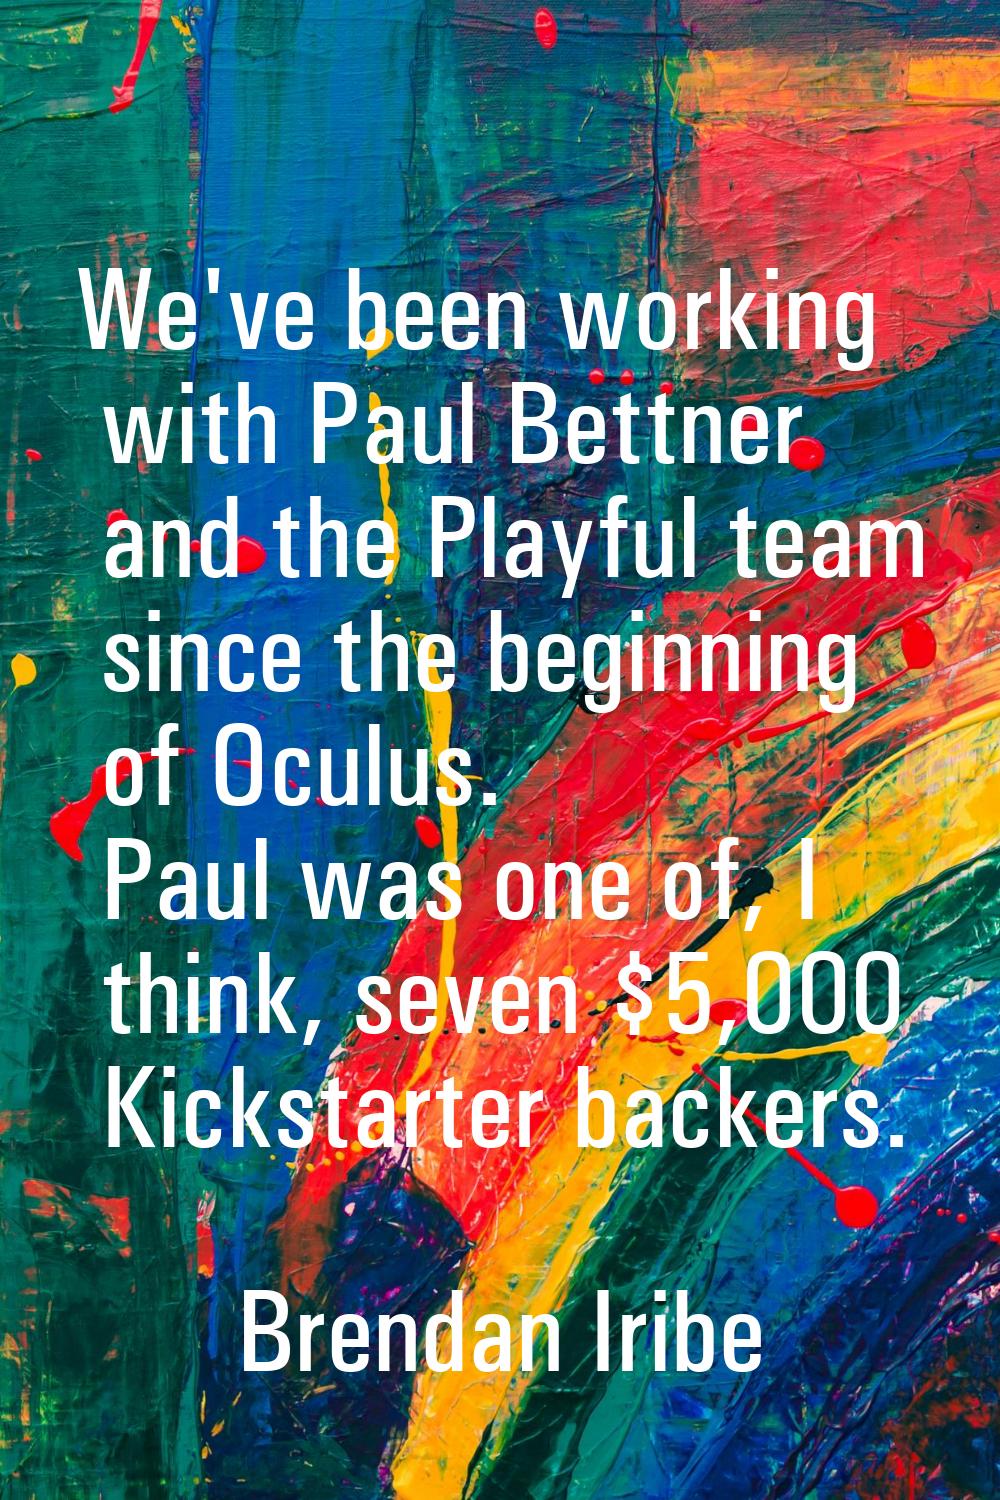 We've been working with Paul Bettner and the Playful team since the beginning of Oculus. Paul was o